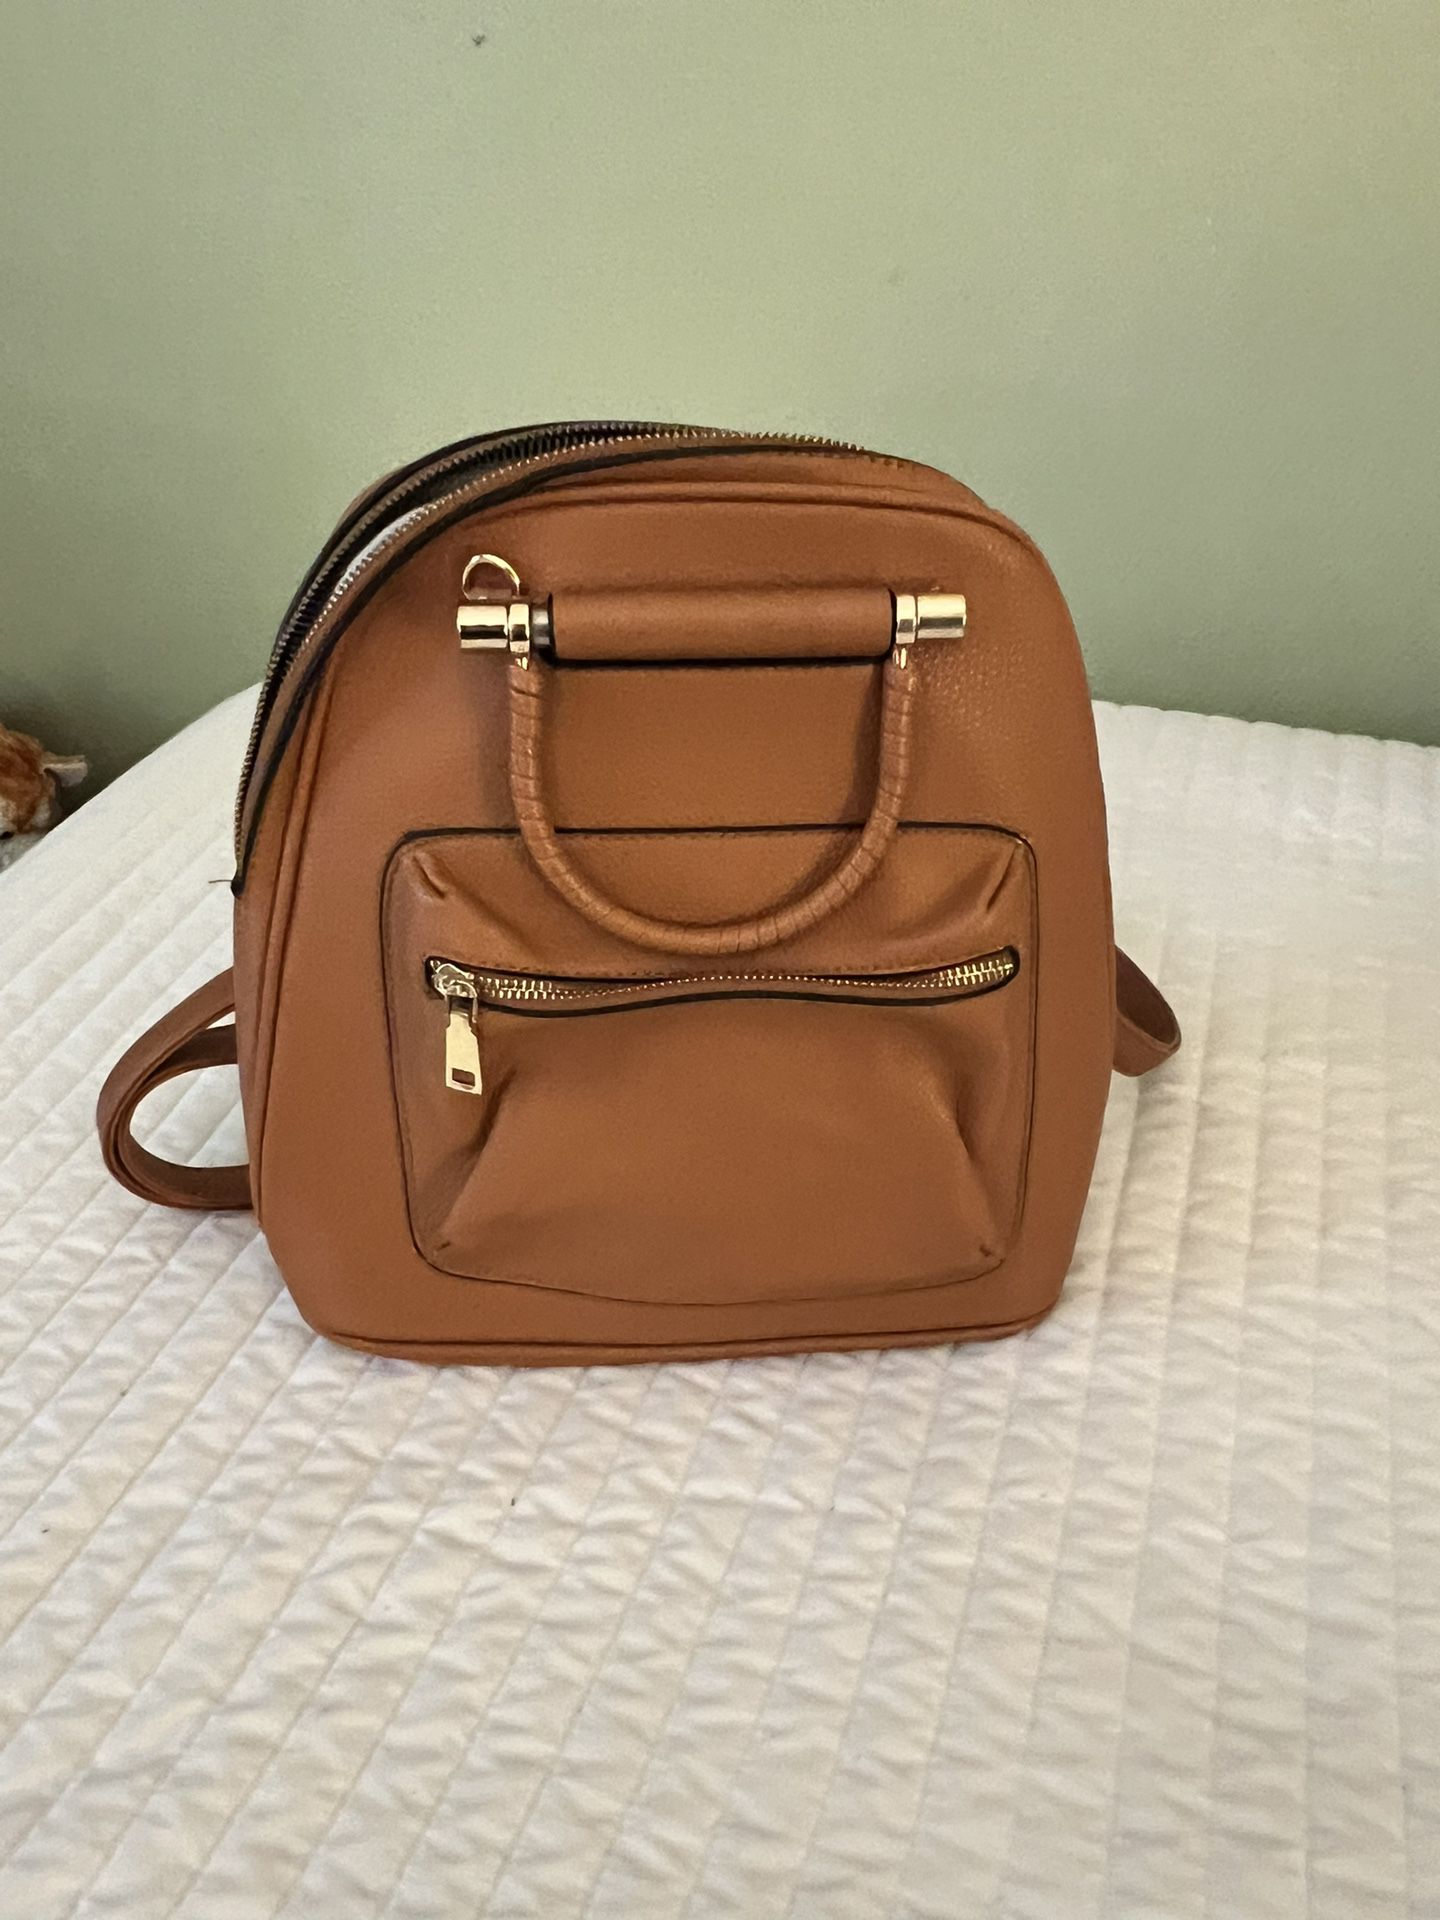 BARELY USED Leather Purse- Gold Accents 